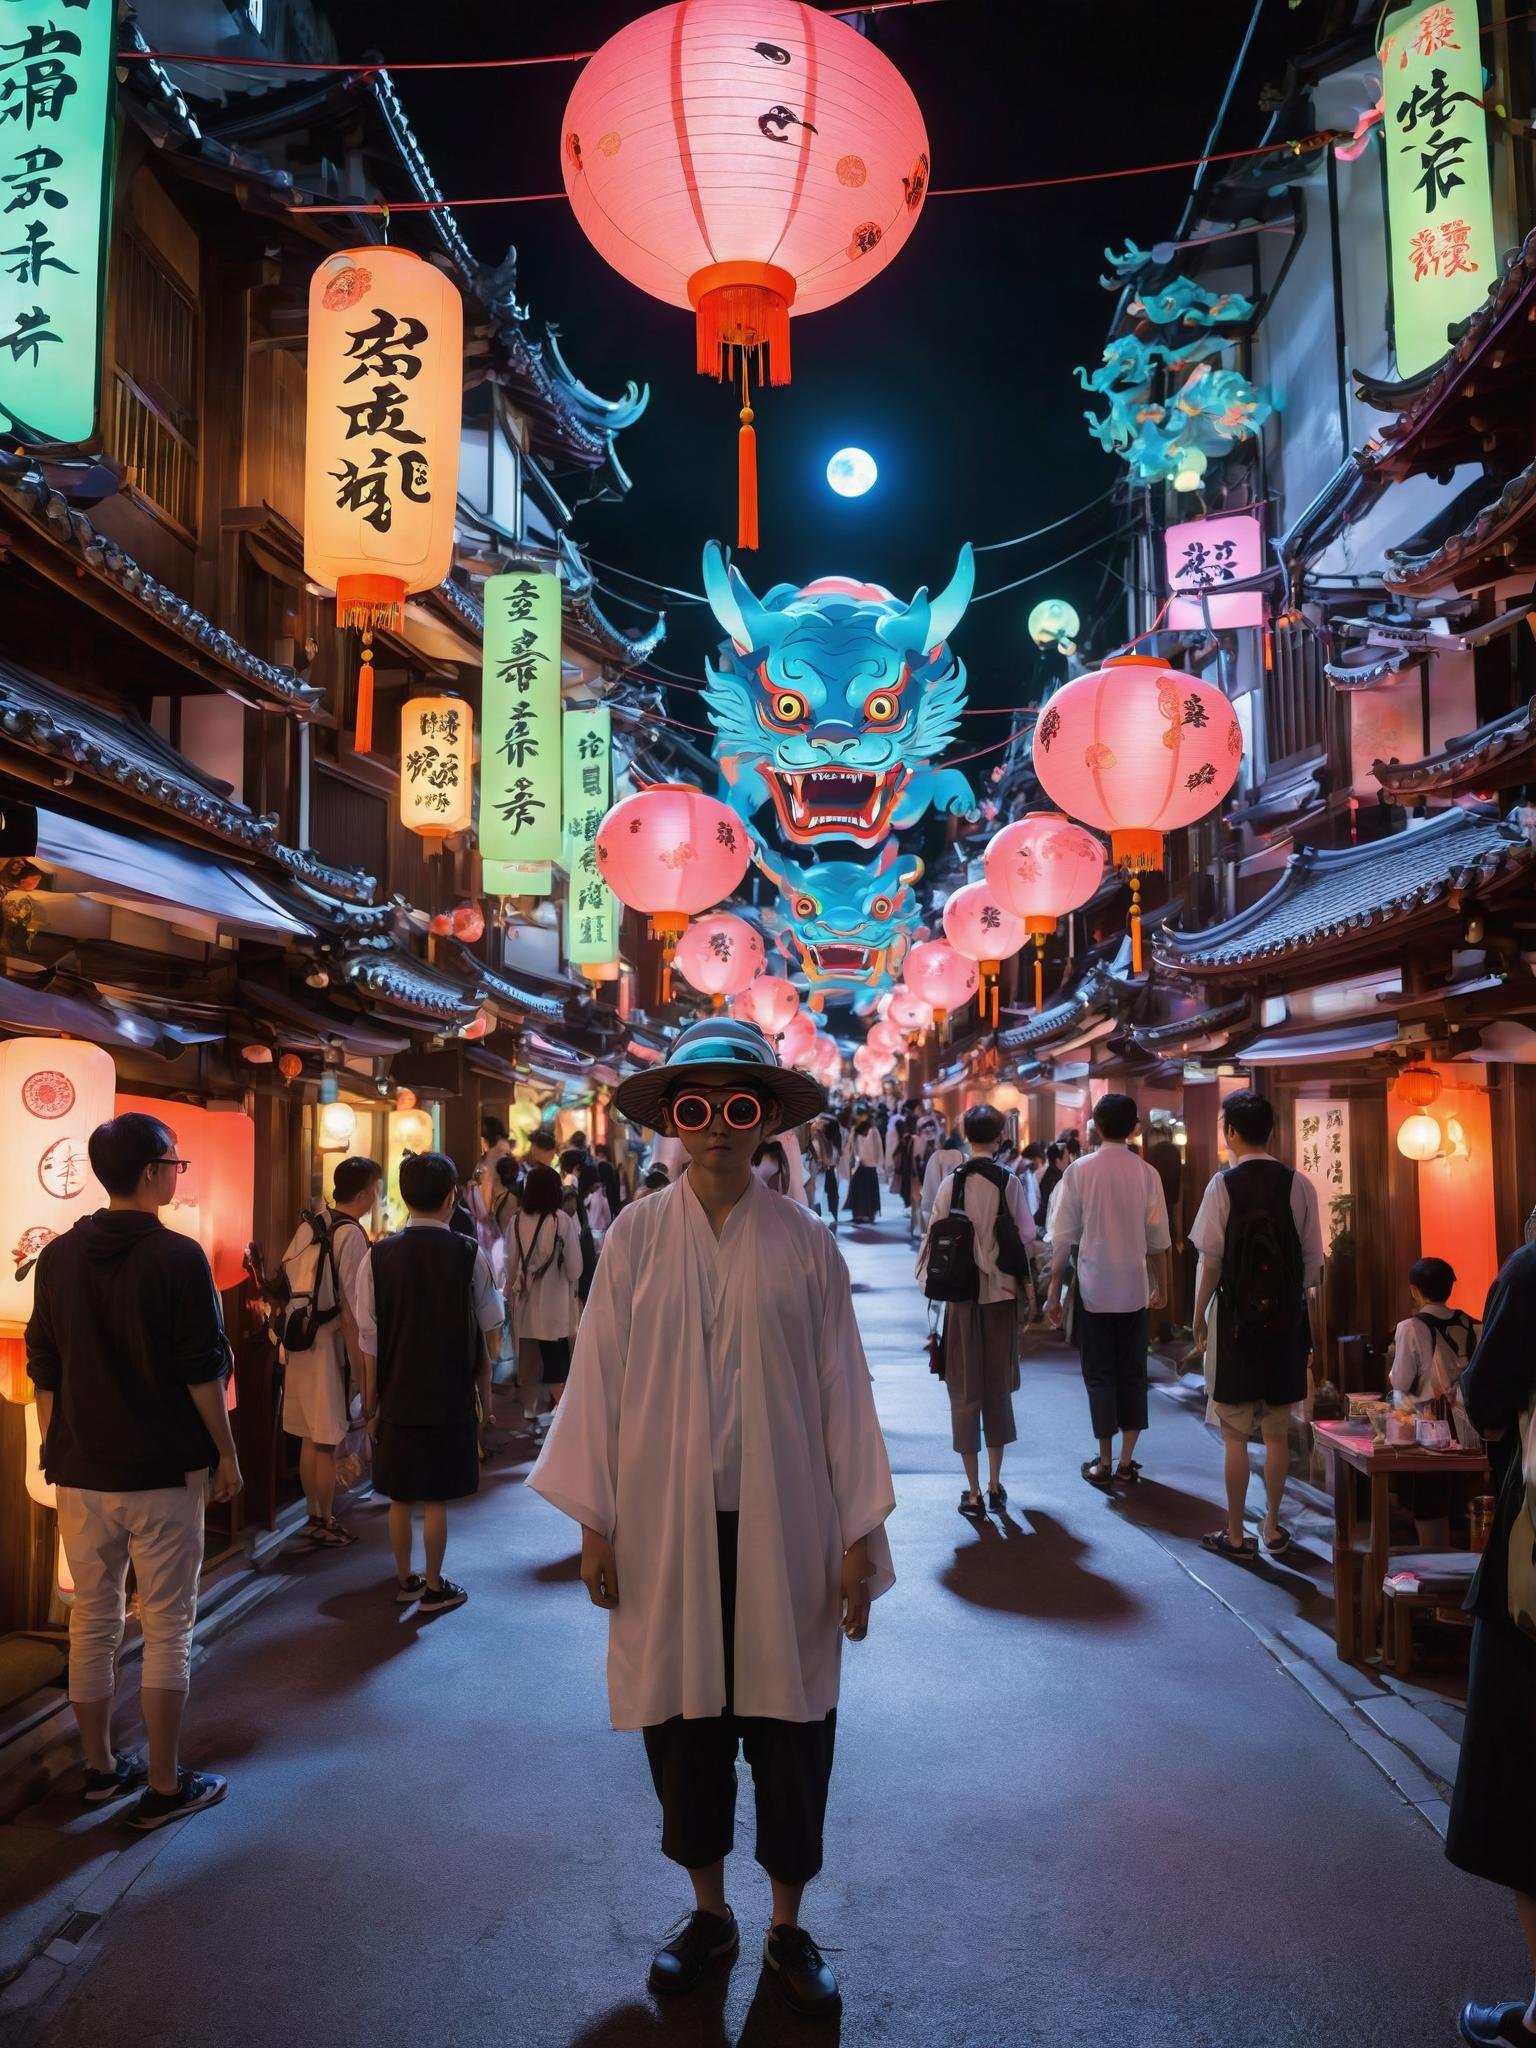 During an annual festival, the streets transform into an augmented reality playground merging ancient Yokai spirits with futuristic technology. Attendees wear AR glasses to interact with holographic Yokai creatures that roam the neon-infused streets. Traditional lanterns float alongside digital projections of mythical beings, creating an immersive experience where folklore and digital innovation coalesce in a captivating celebration, <lora:ByteBlade:1>